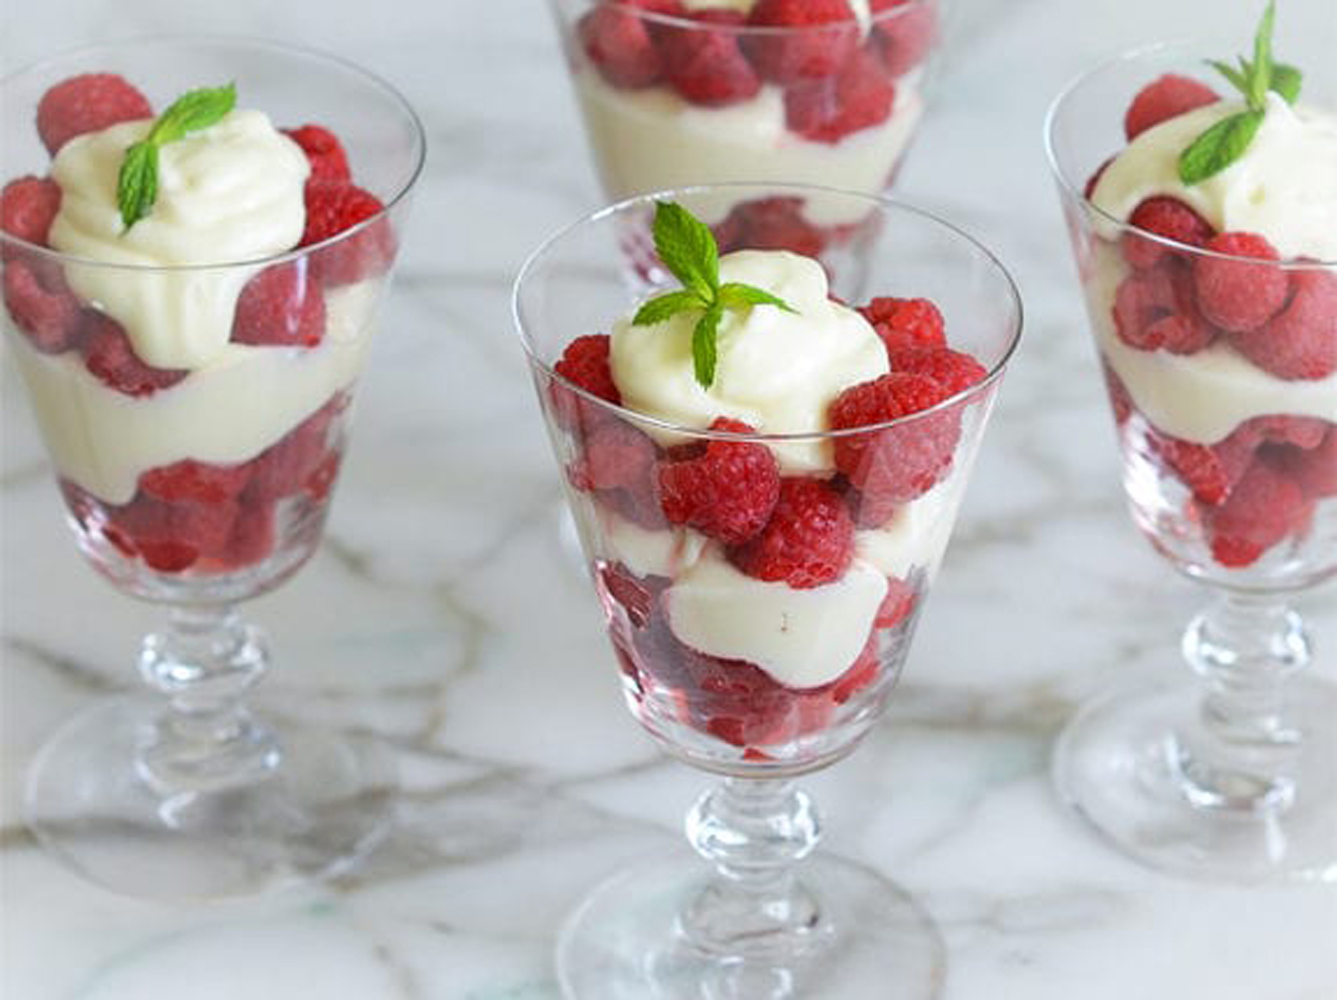 Raspberry & Cream Parfaits - Once Upon a Chef